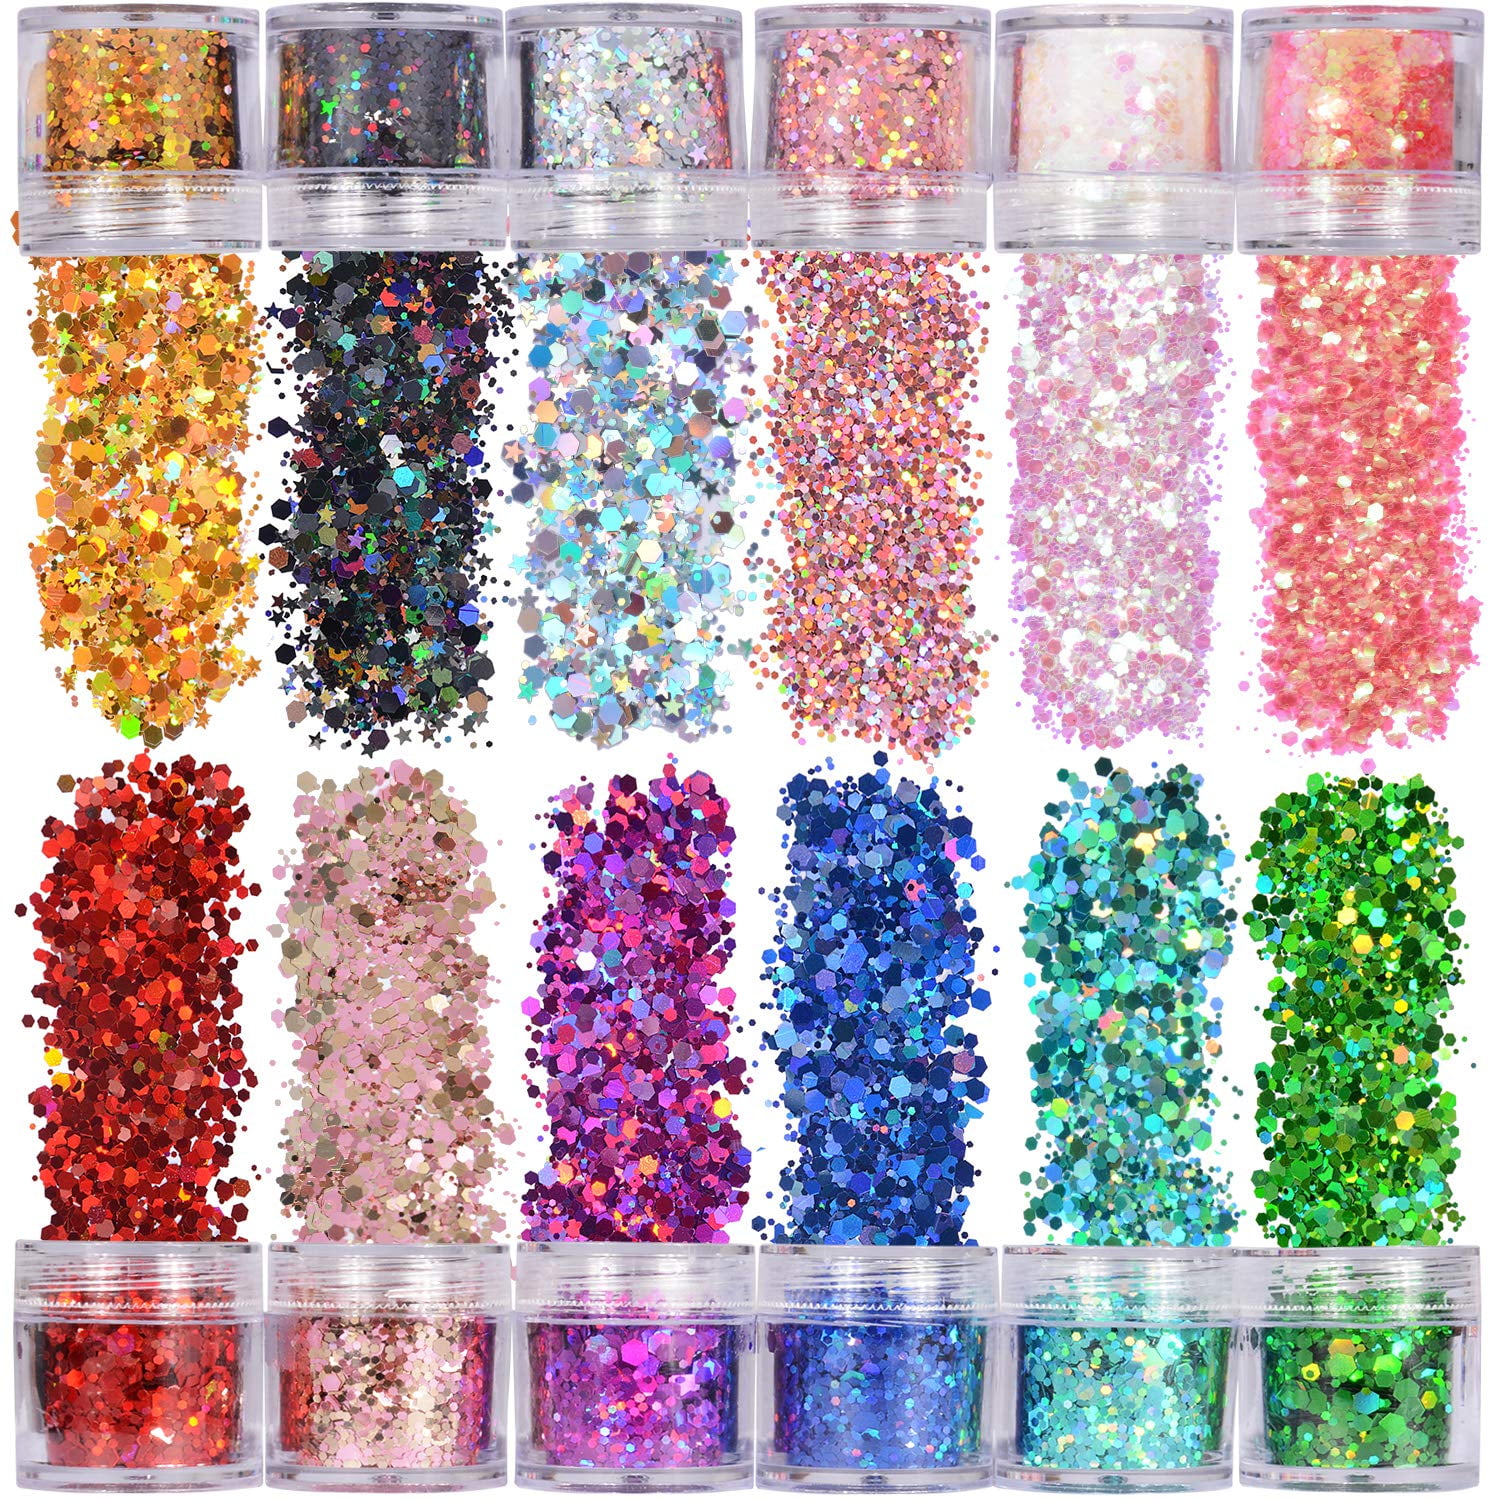  12 Colors Holographic Chunky Glitter Flakes Hexagon Shapes  Glitter Sequins Nail Stickers Sparkles Resin Epoxy Accessories for Crafts  Nail Art Body Makeup : Beauty & Personal Care